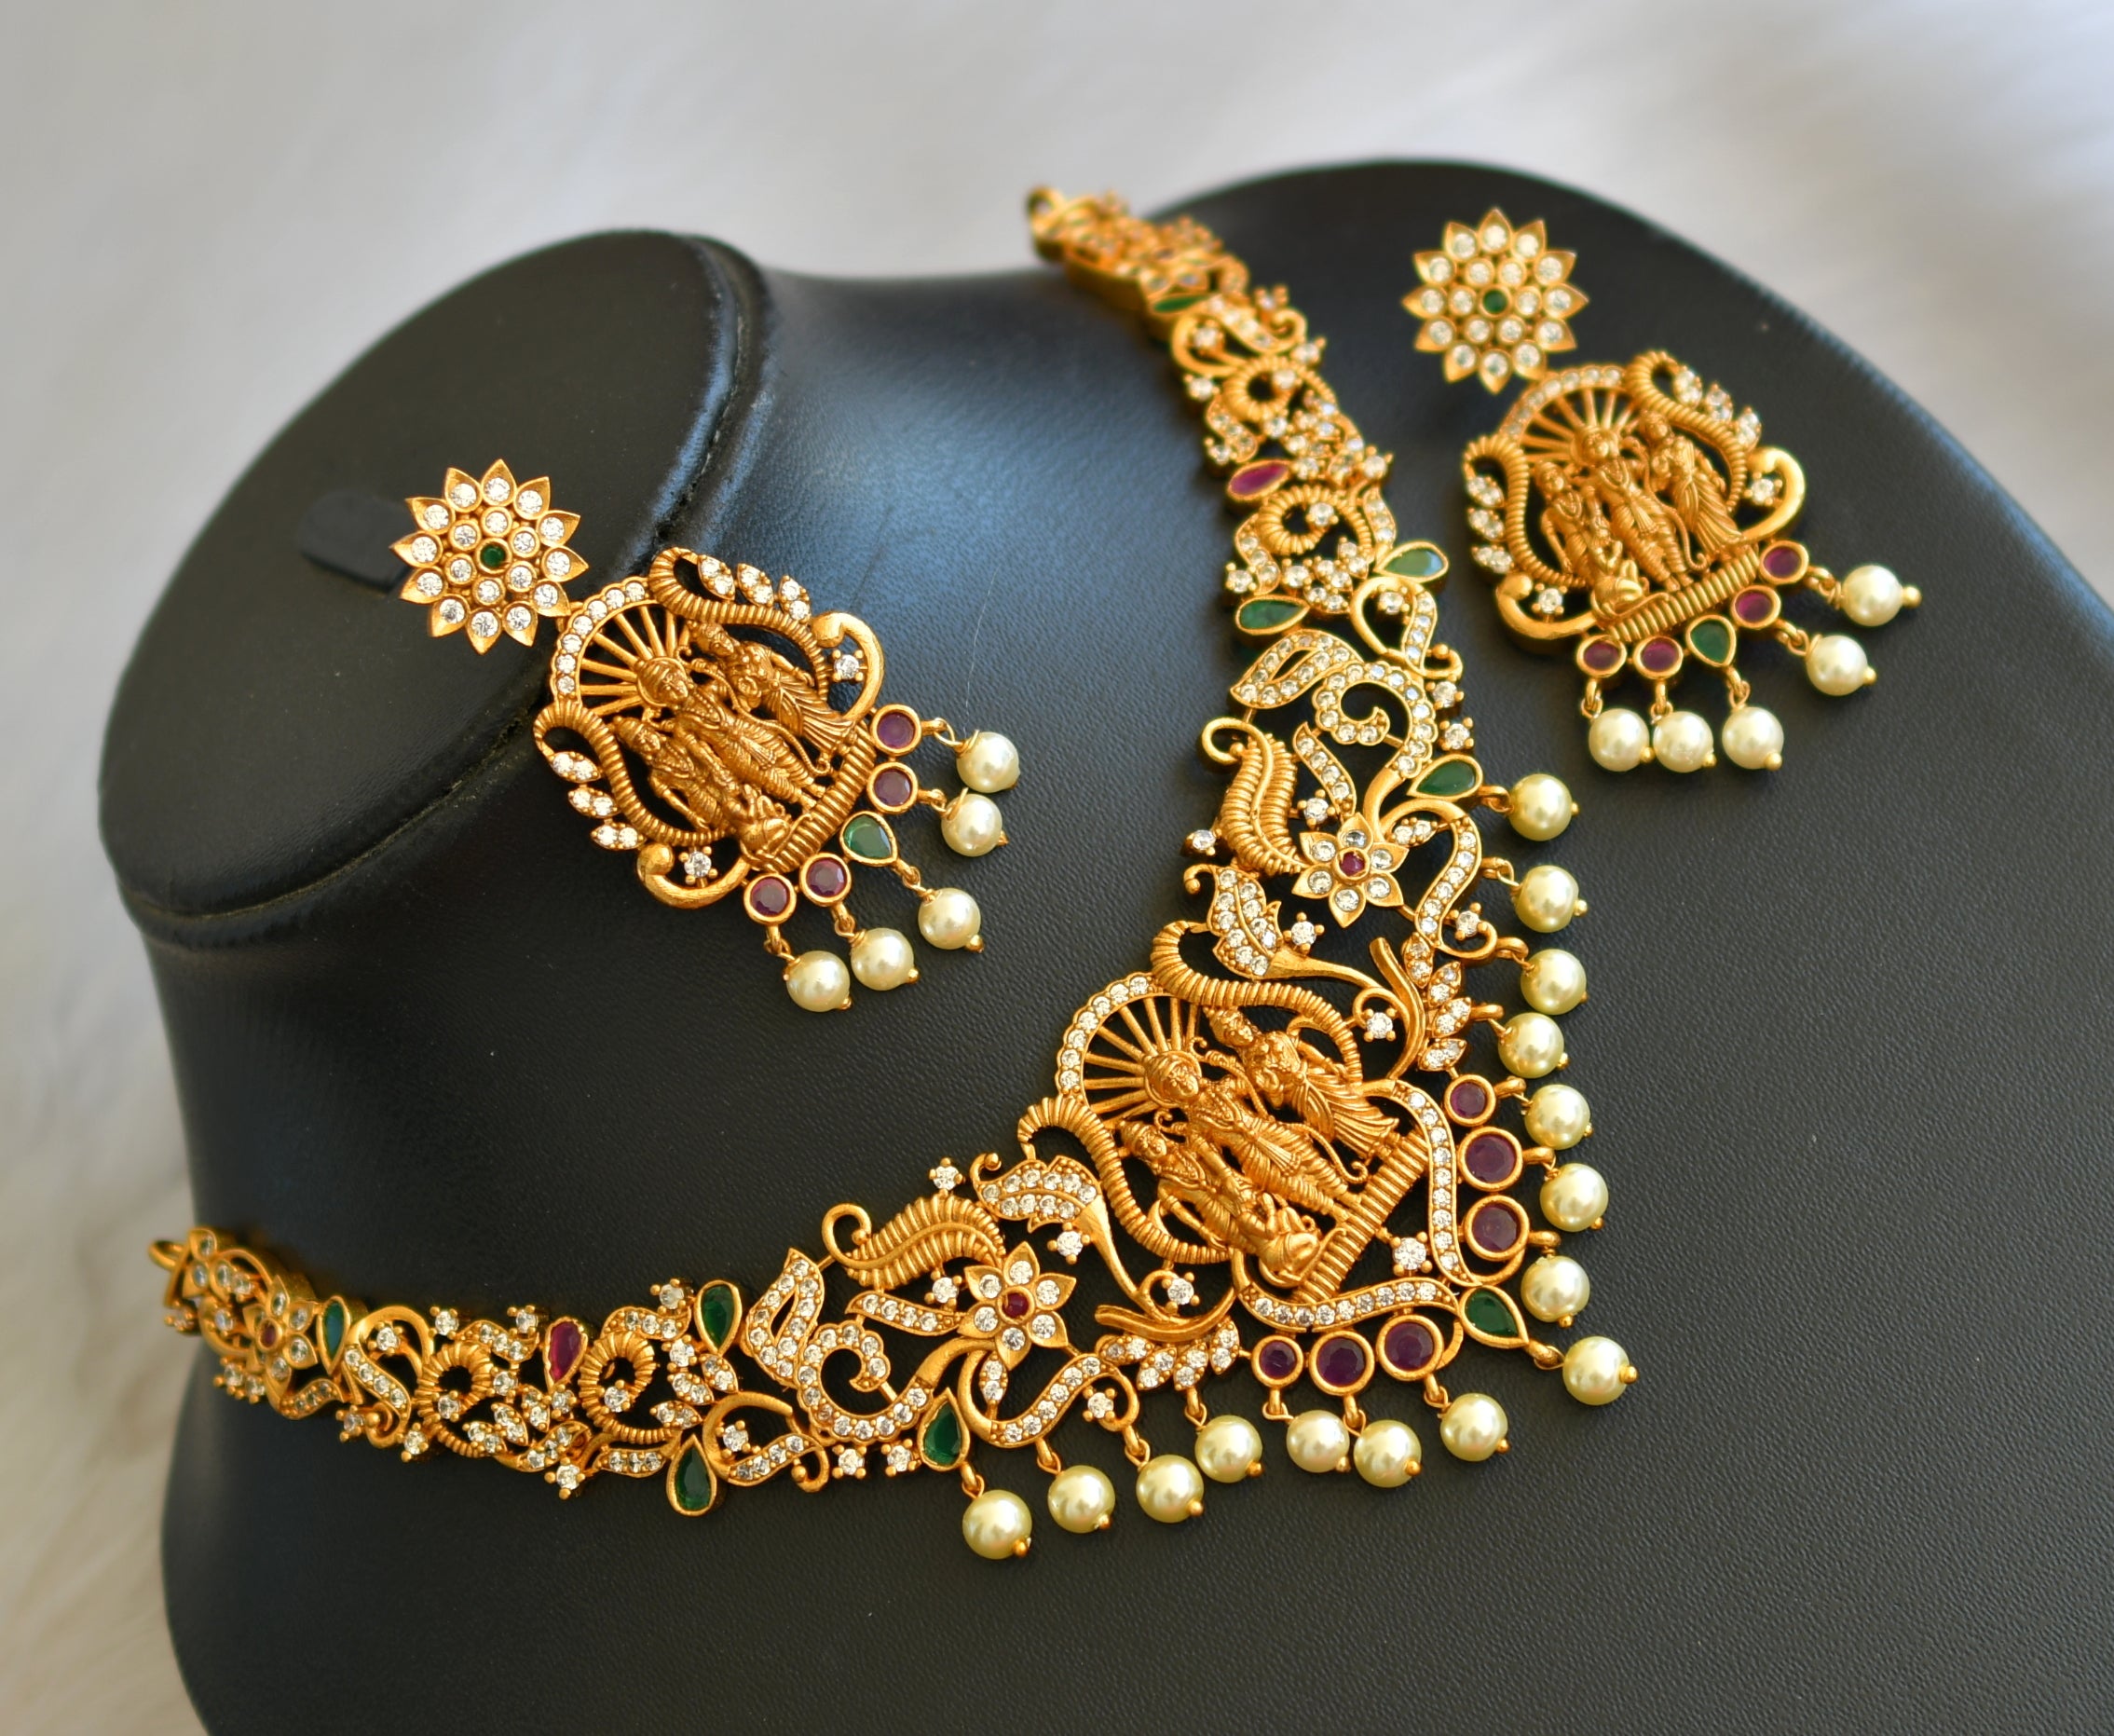 Stunning one gram gold necklace with Ram parivar kasu hangings. Necklac… |  Gold necklace indian bridal jewelry, Bridal gold jewellery designs, Gold  earrings designs